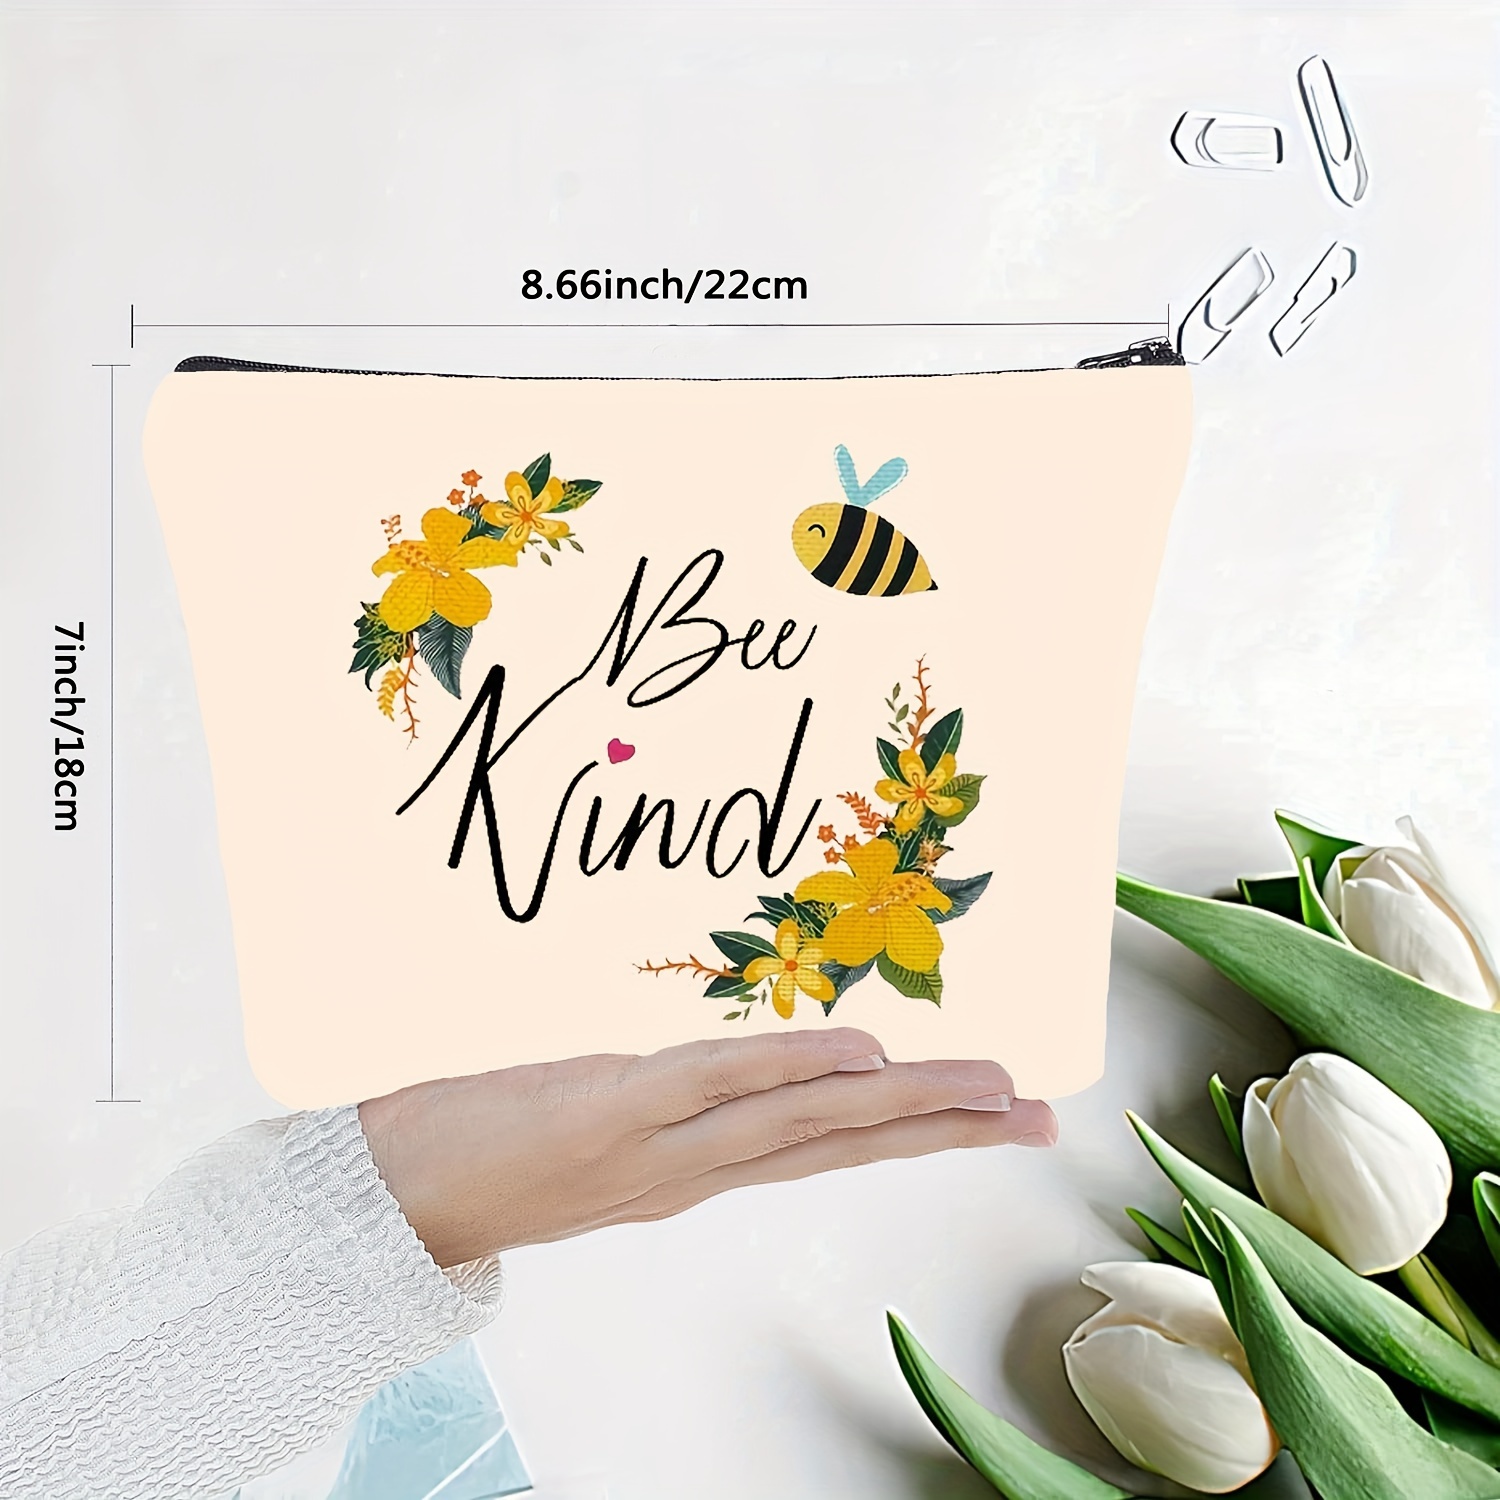 Bee Inspirational Gifts Makeup Bag Bee Lovers Gifts for Women Honeybee  Gifts for Beekeeper Gardener Bee Cosmetic Bag Bee Gifts for Teachers Bee  Themed